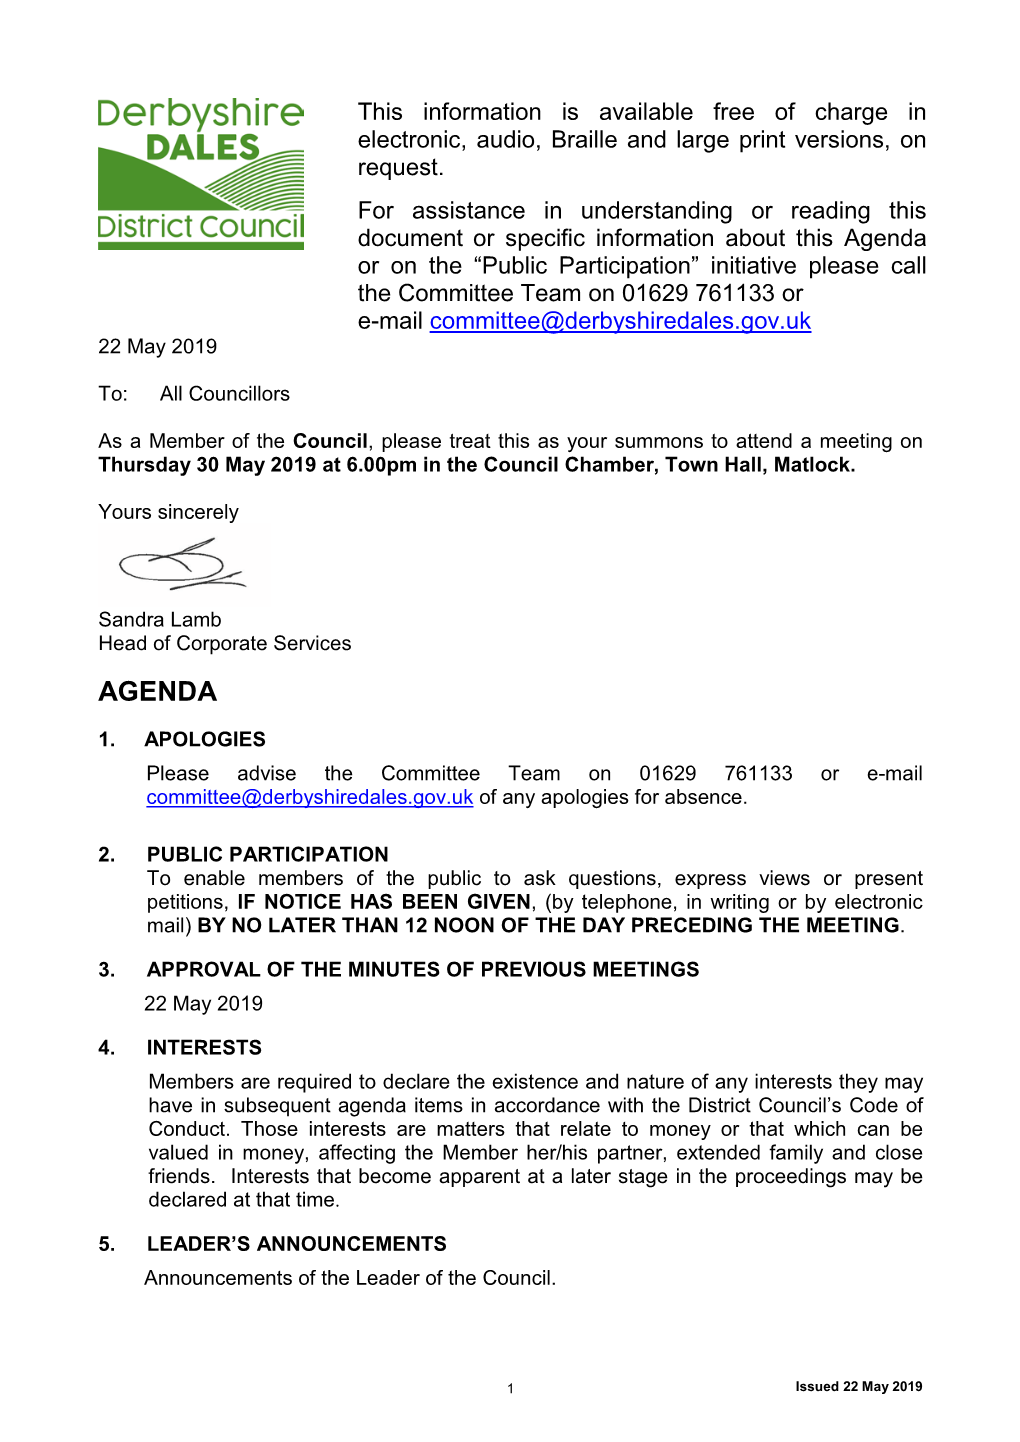 Agenda Or on the “Public Participation” Initiative Please Call the Committee Team on 01629 761133 Or E-Mail Committee@Derbyshiredales.Gov.Uk 22 May 2019